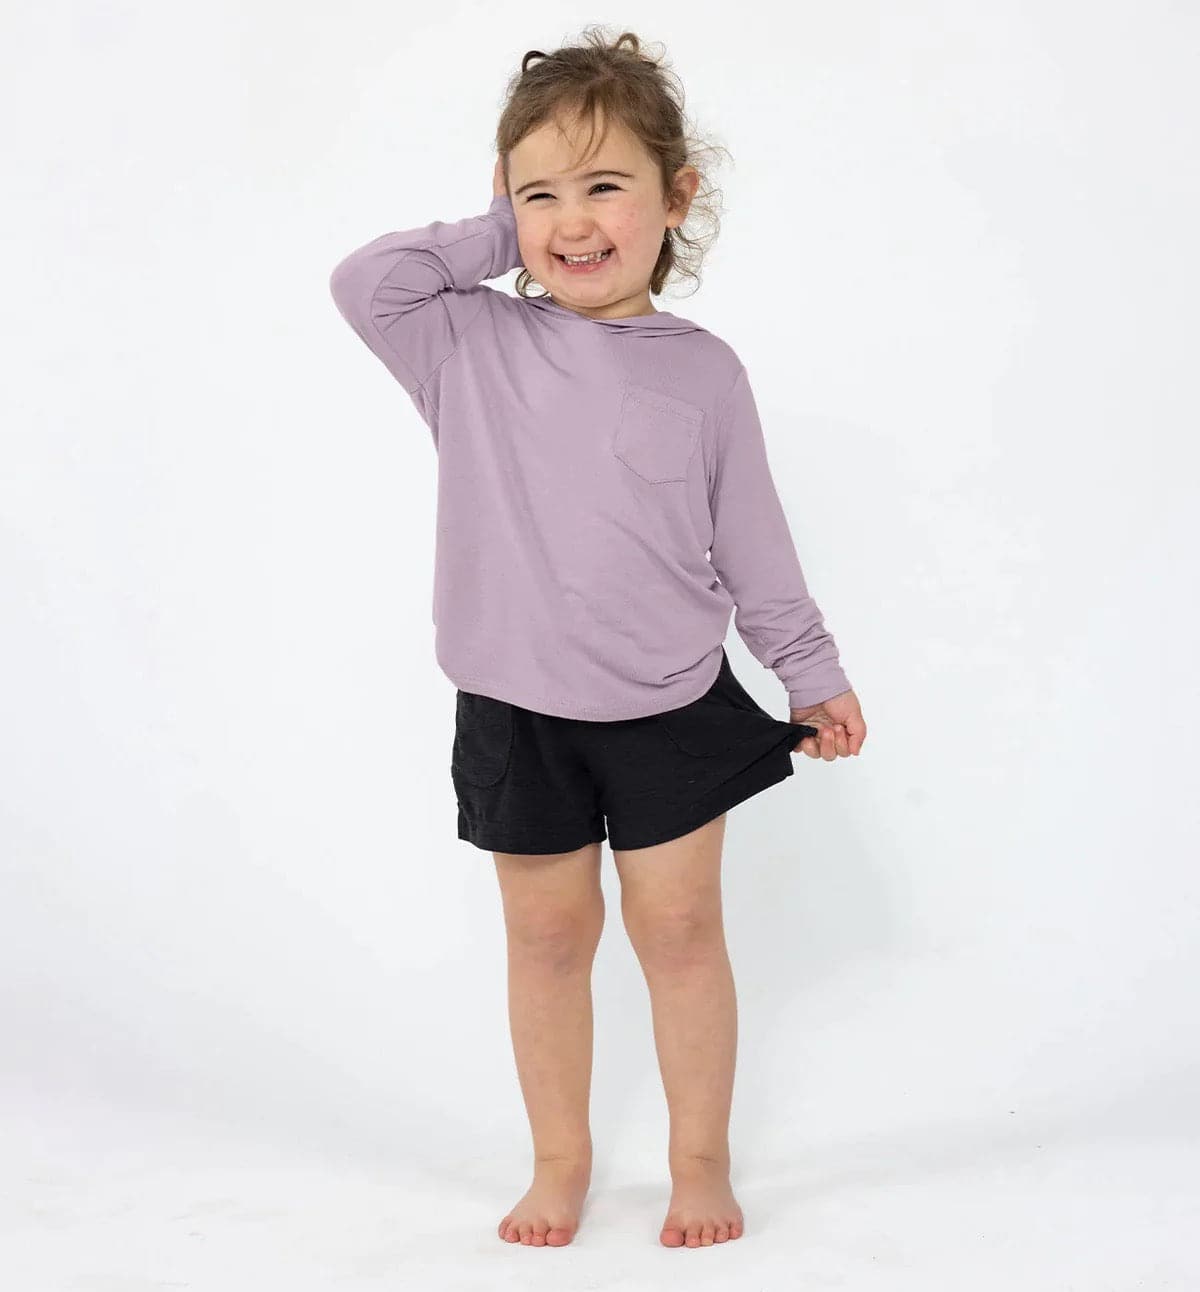 Featuring the Toddler Bamboo Shade Hoody kid's and babies, kid's thermal layering manufactured by Free Fly shown here from a third angle.